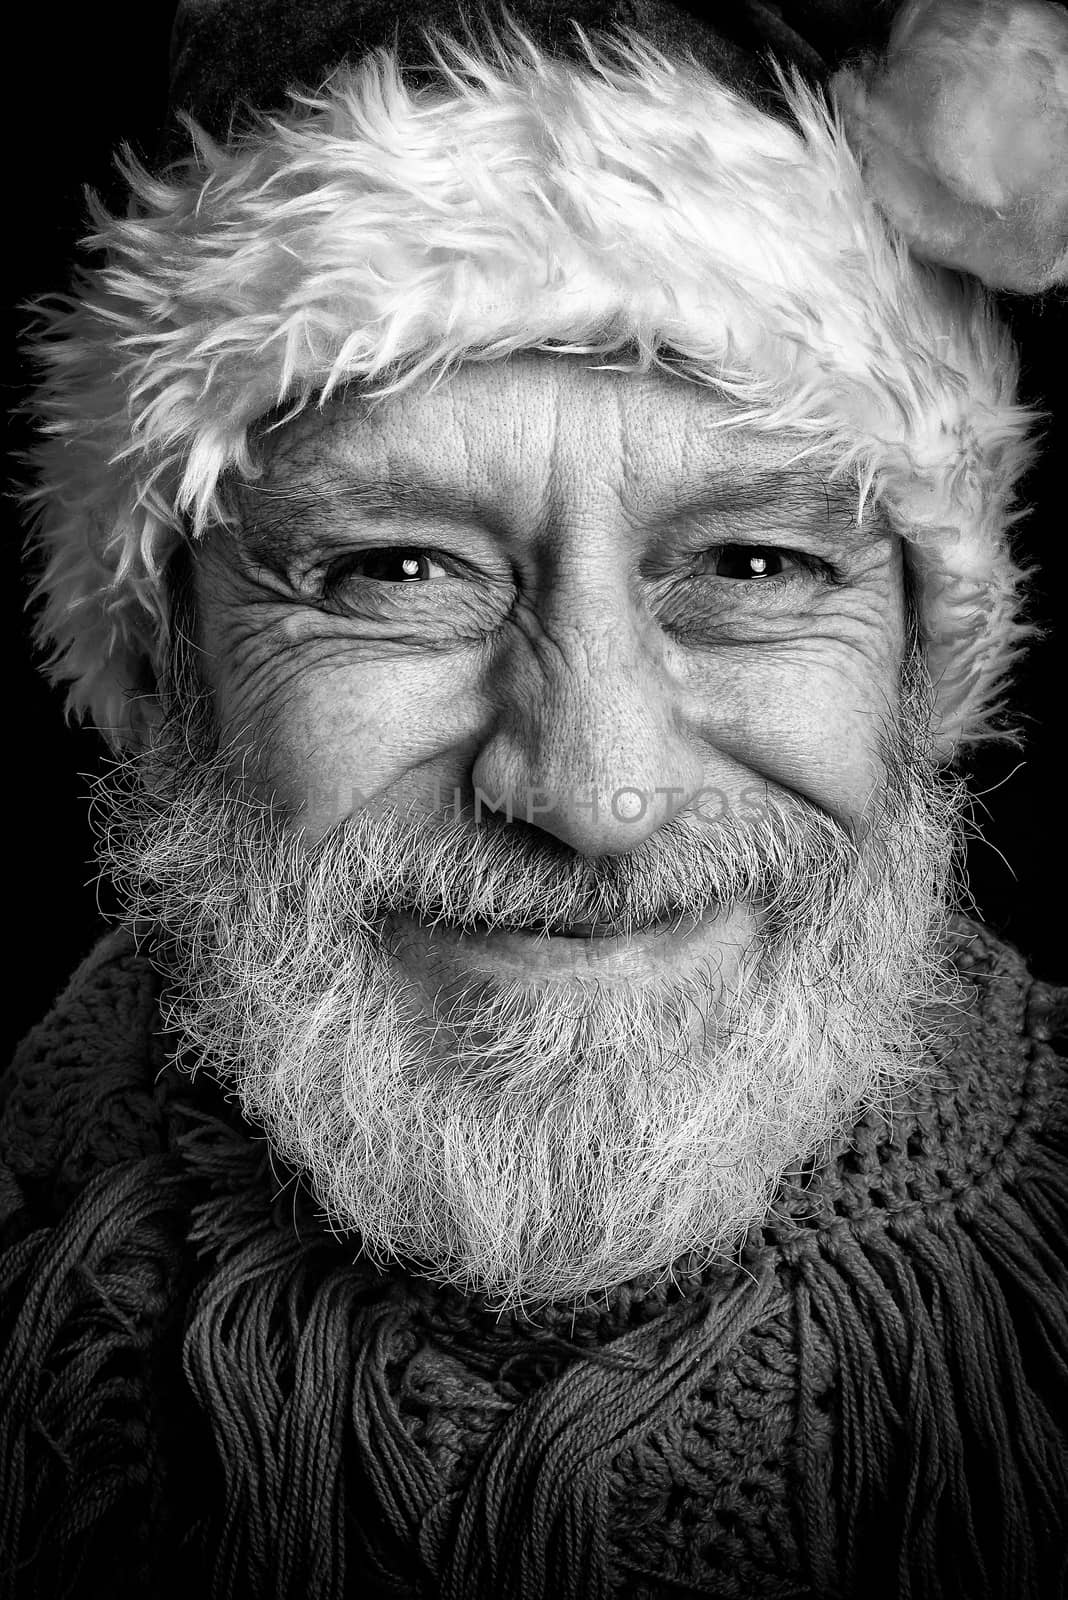 Black and white portrait of an adult man with white beard disguised in Santa Claus for the Christmas Holiday